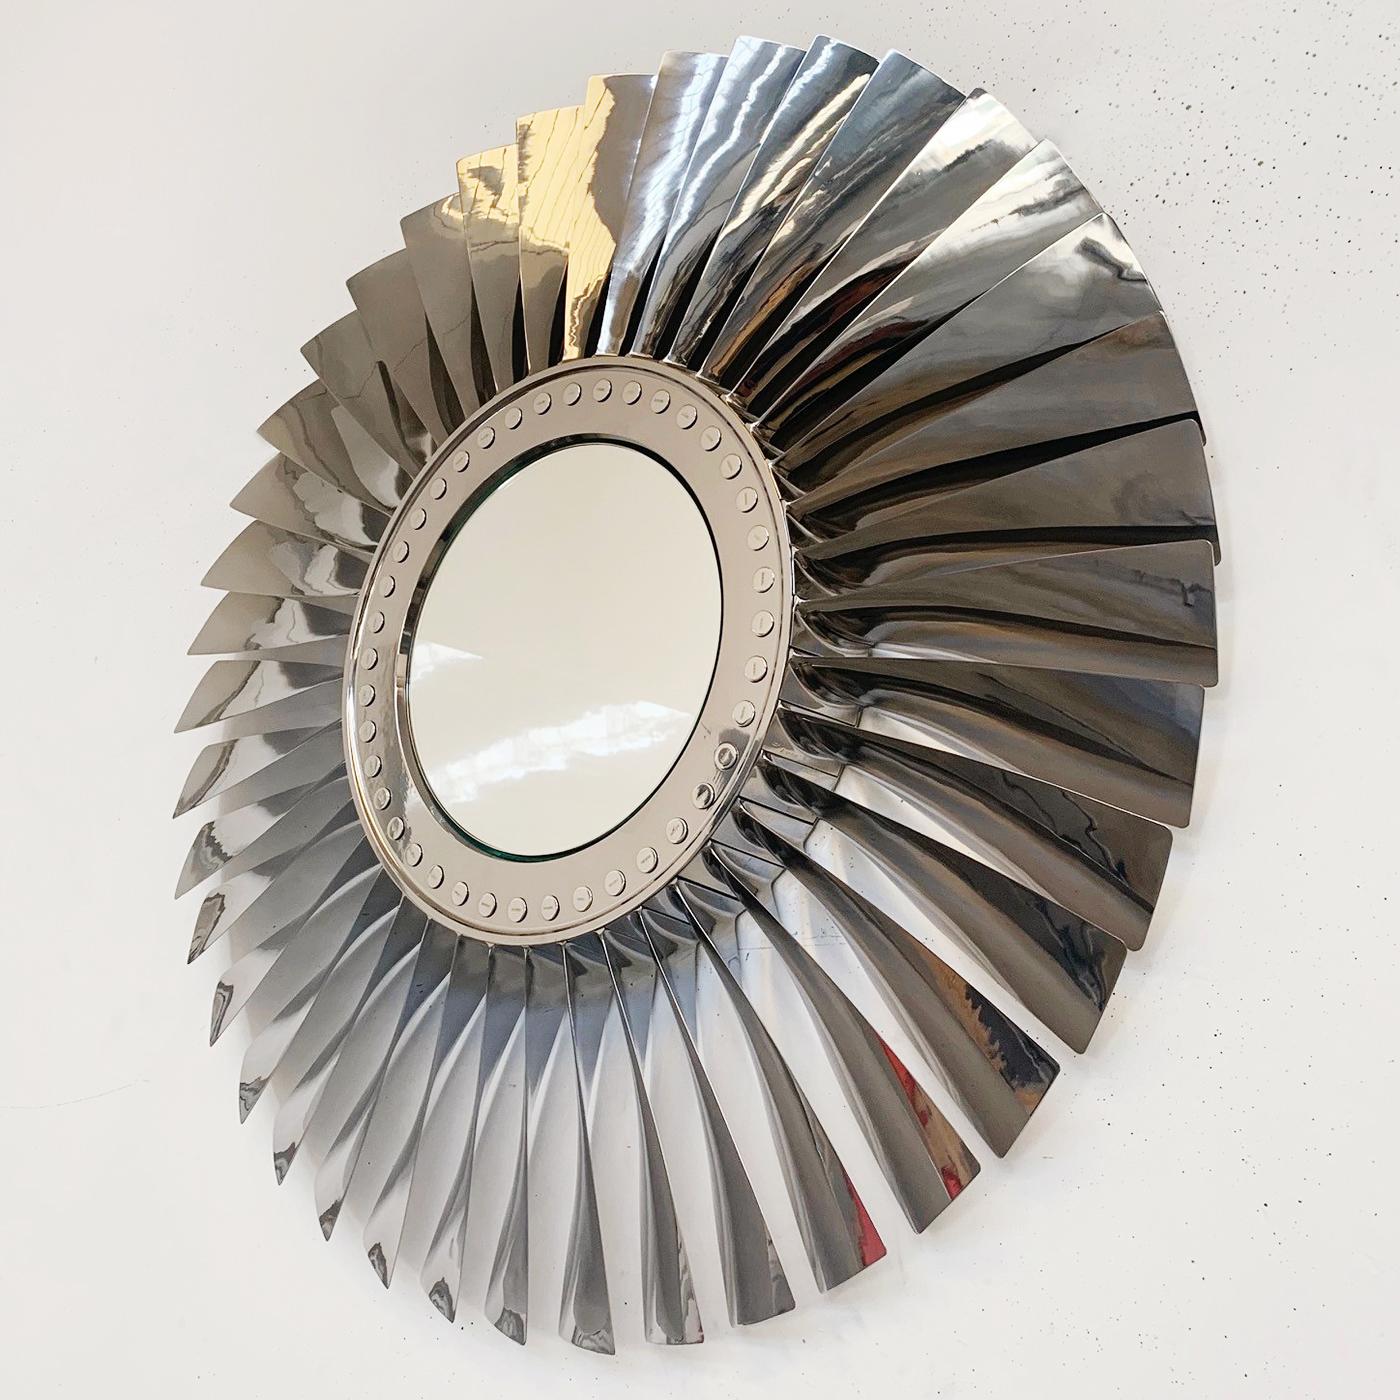 Mirror Boeing Turbine with center mirror glass and frame made with
an original turbine in titanium alloy from a Stage I / II Engine fan from 
a Boeing B-737. Turbine in chrome polished finish. Exceptional piece.